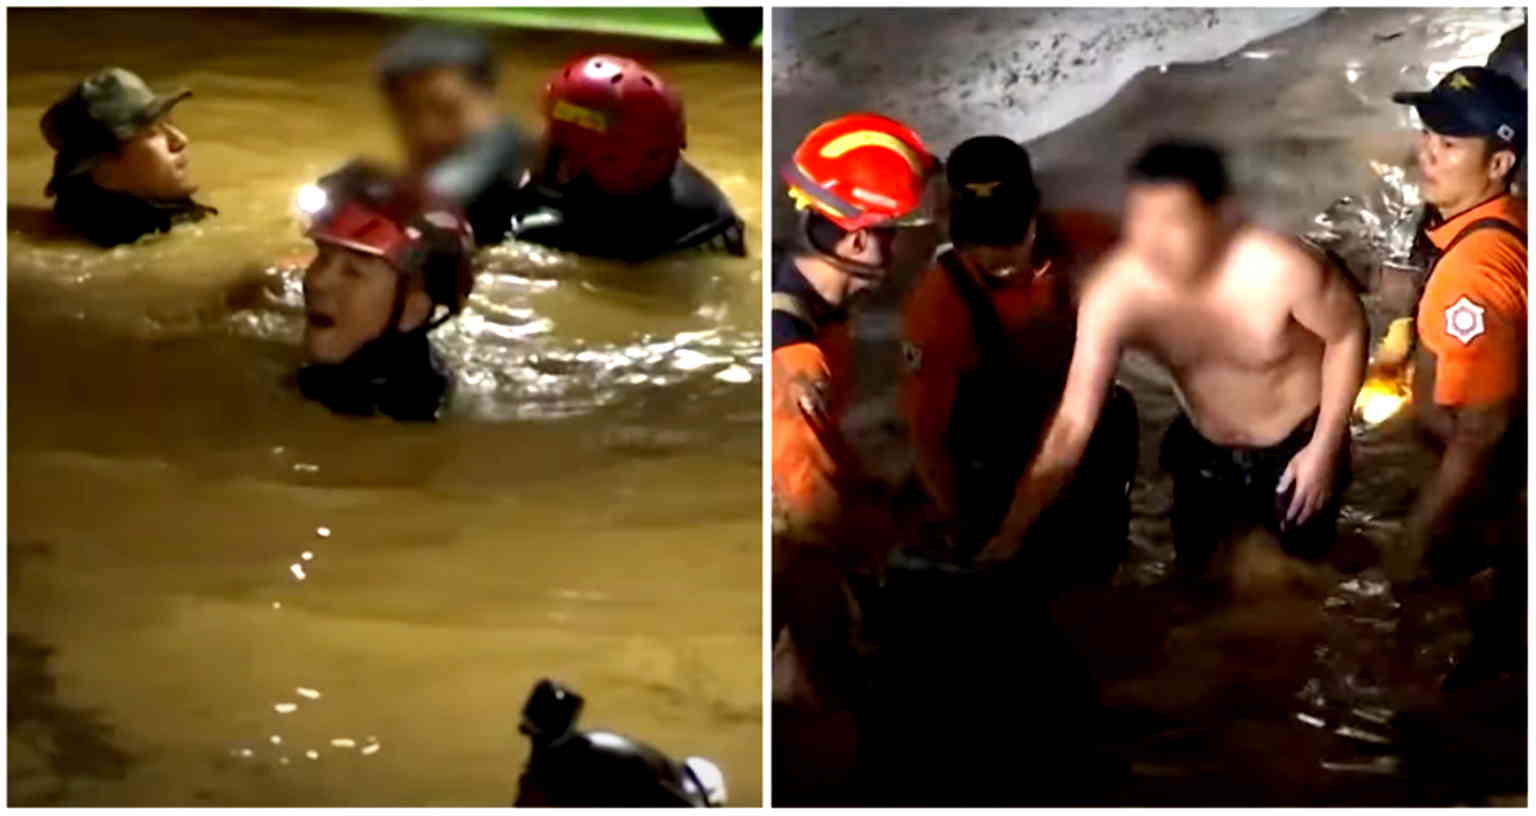 Typhoon Hinnamnor: 2 S. Koreans rescued after 12 hours clinging to pipes in flooded car park